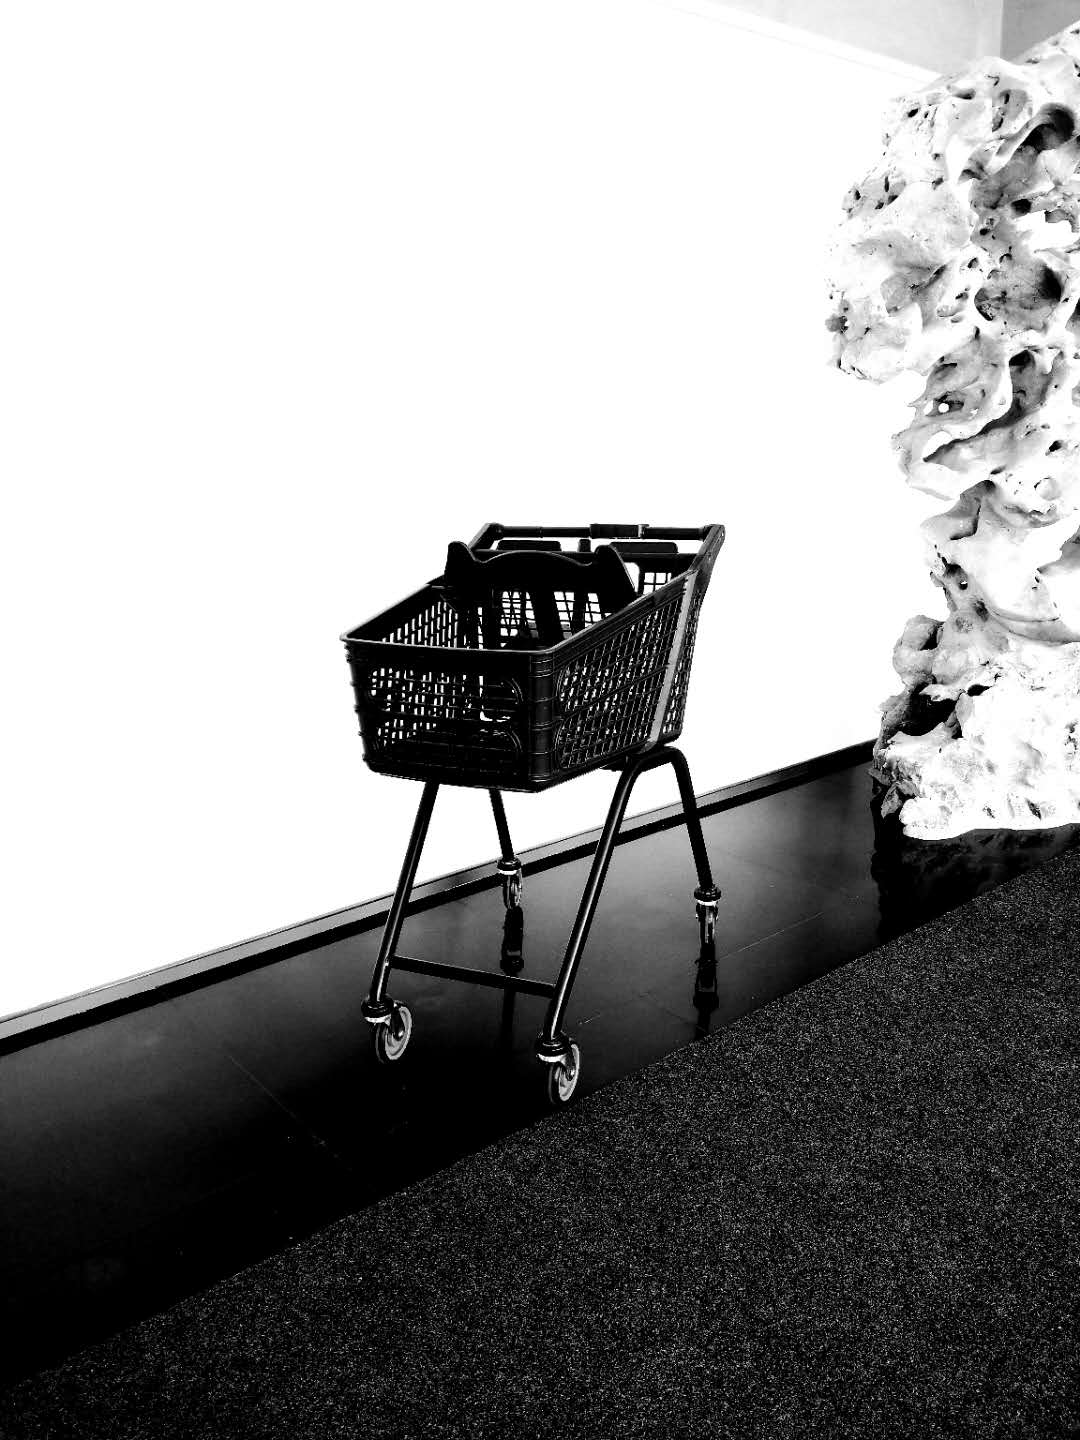 Shopping Carts And Baskets For Supermarkets